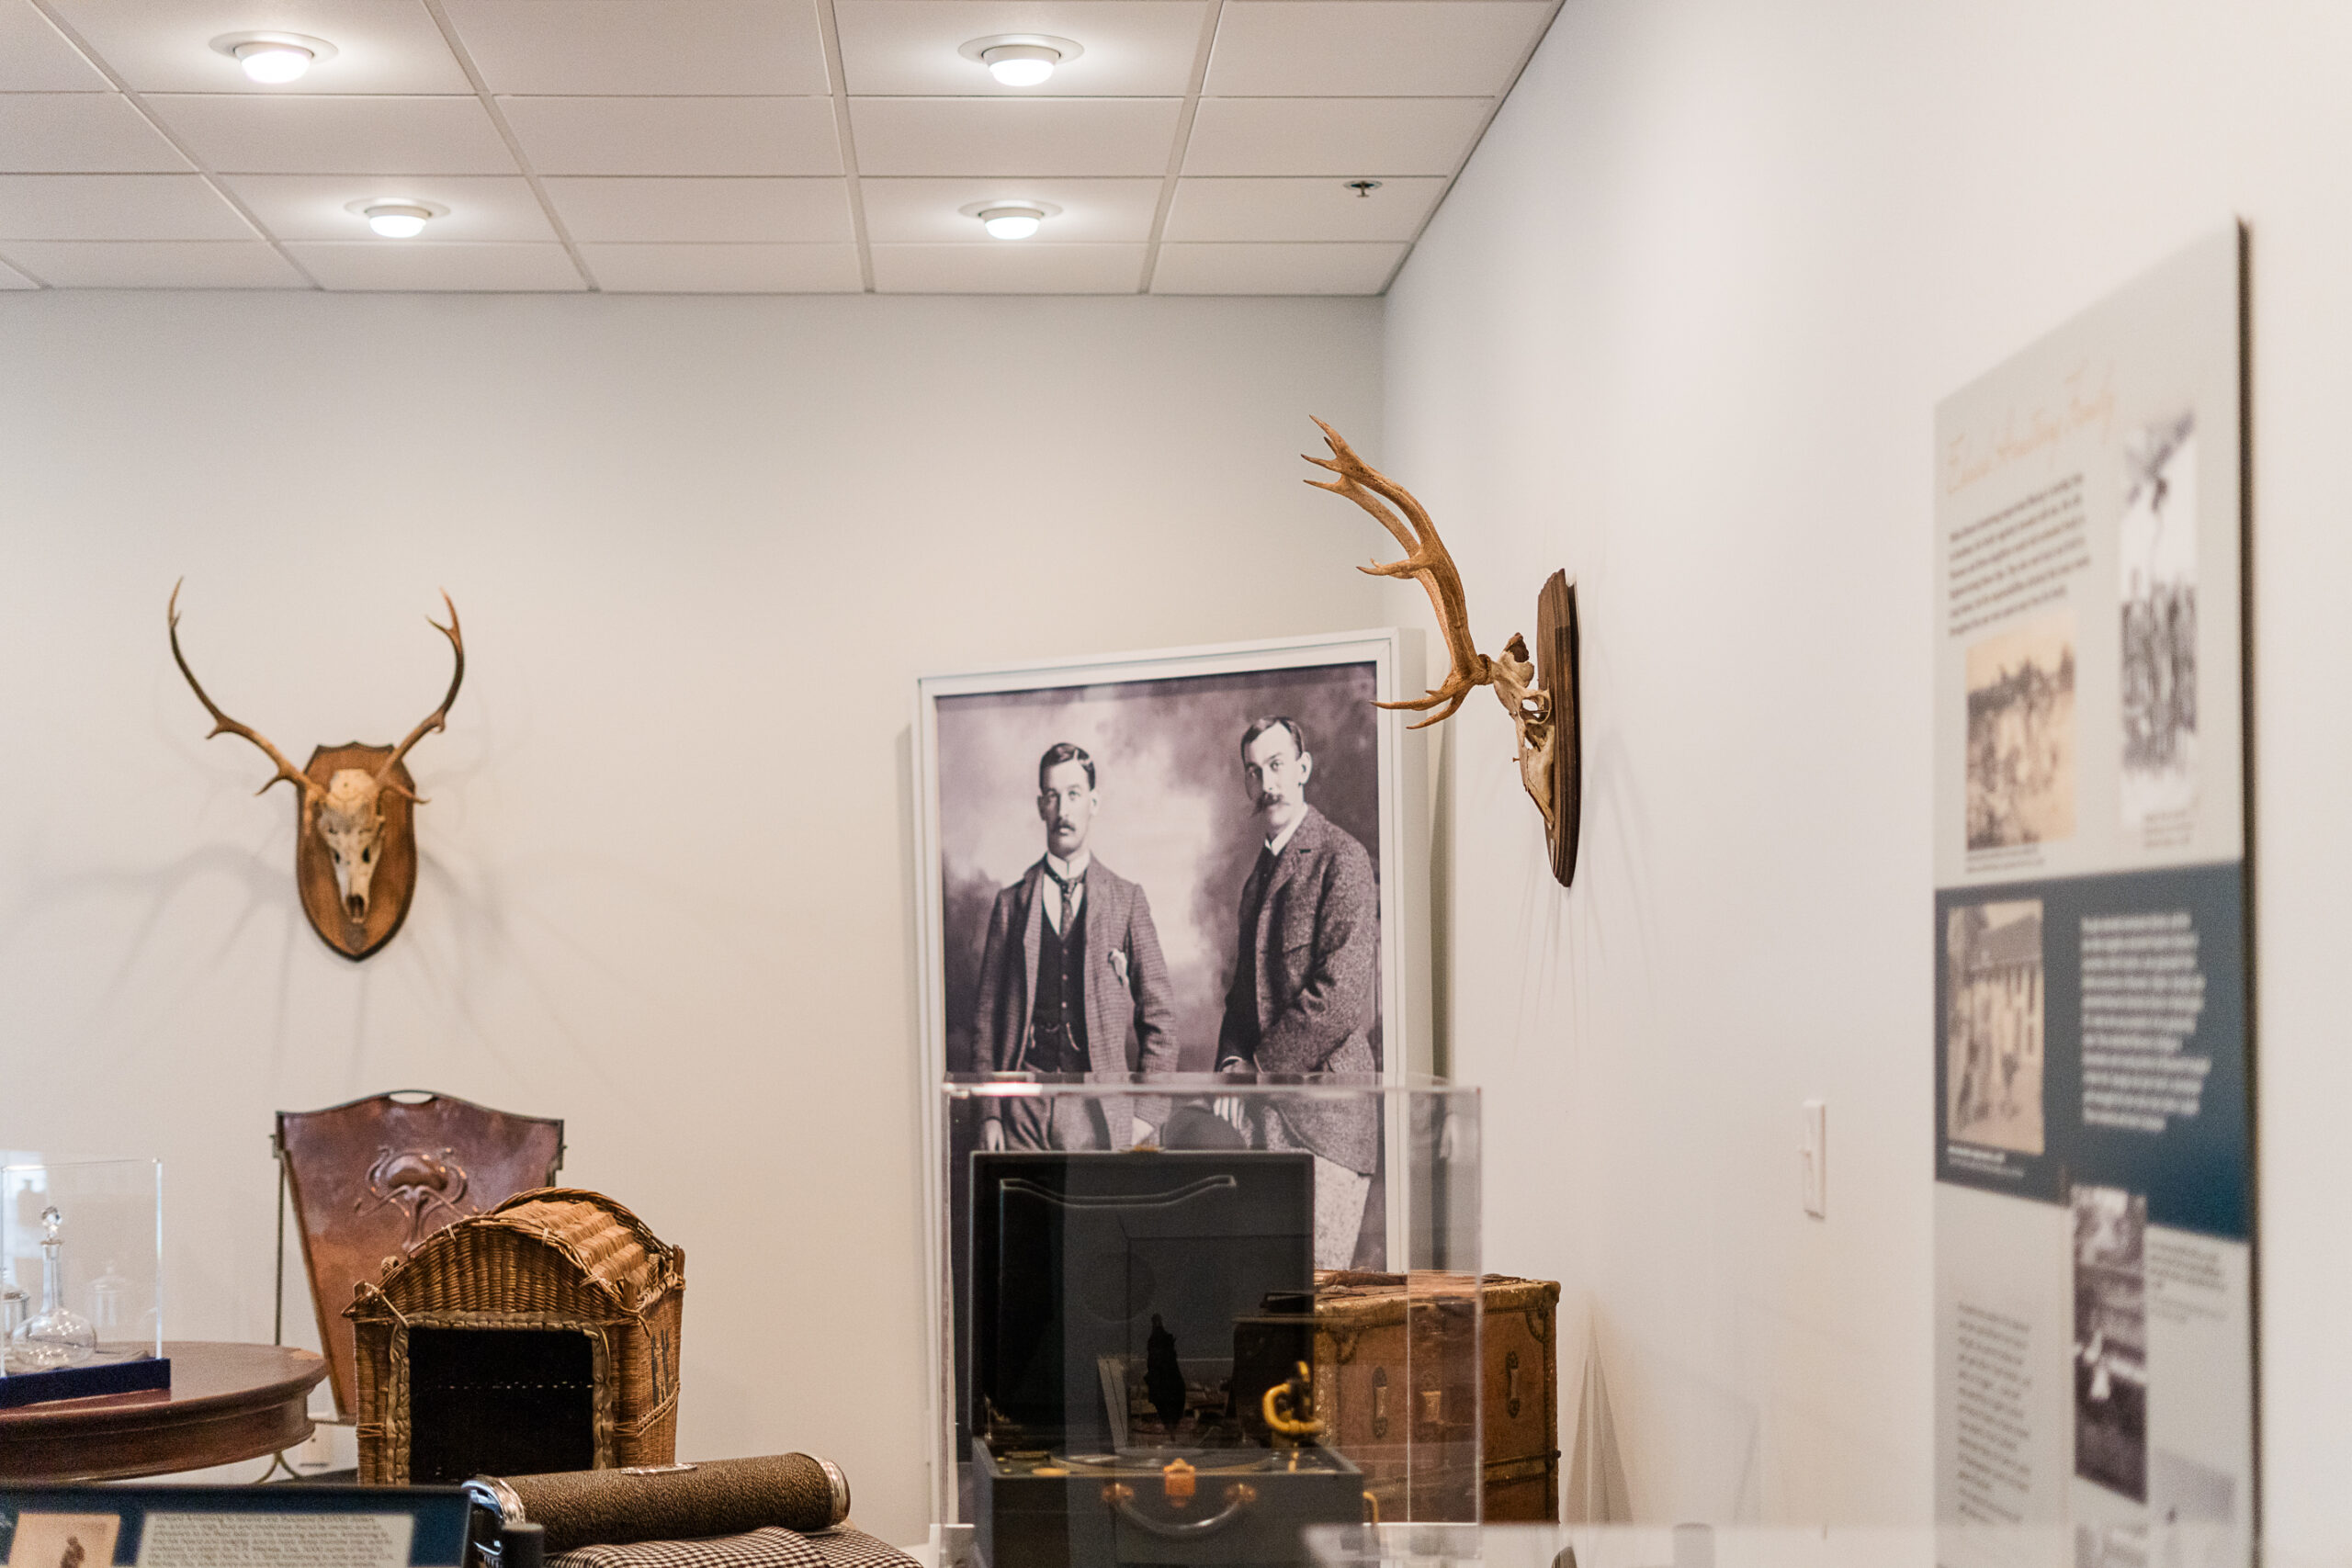 Hunting Lodge Exhibit at High Point Museum